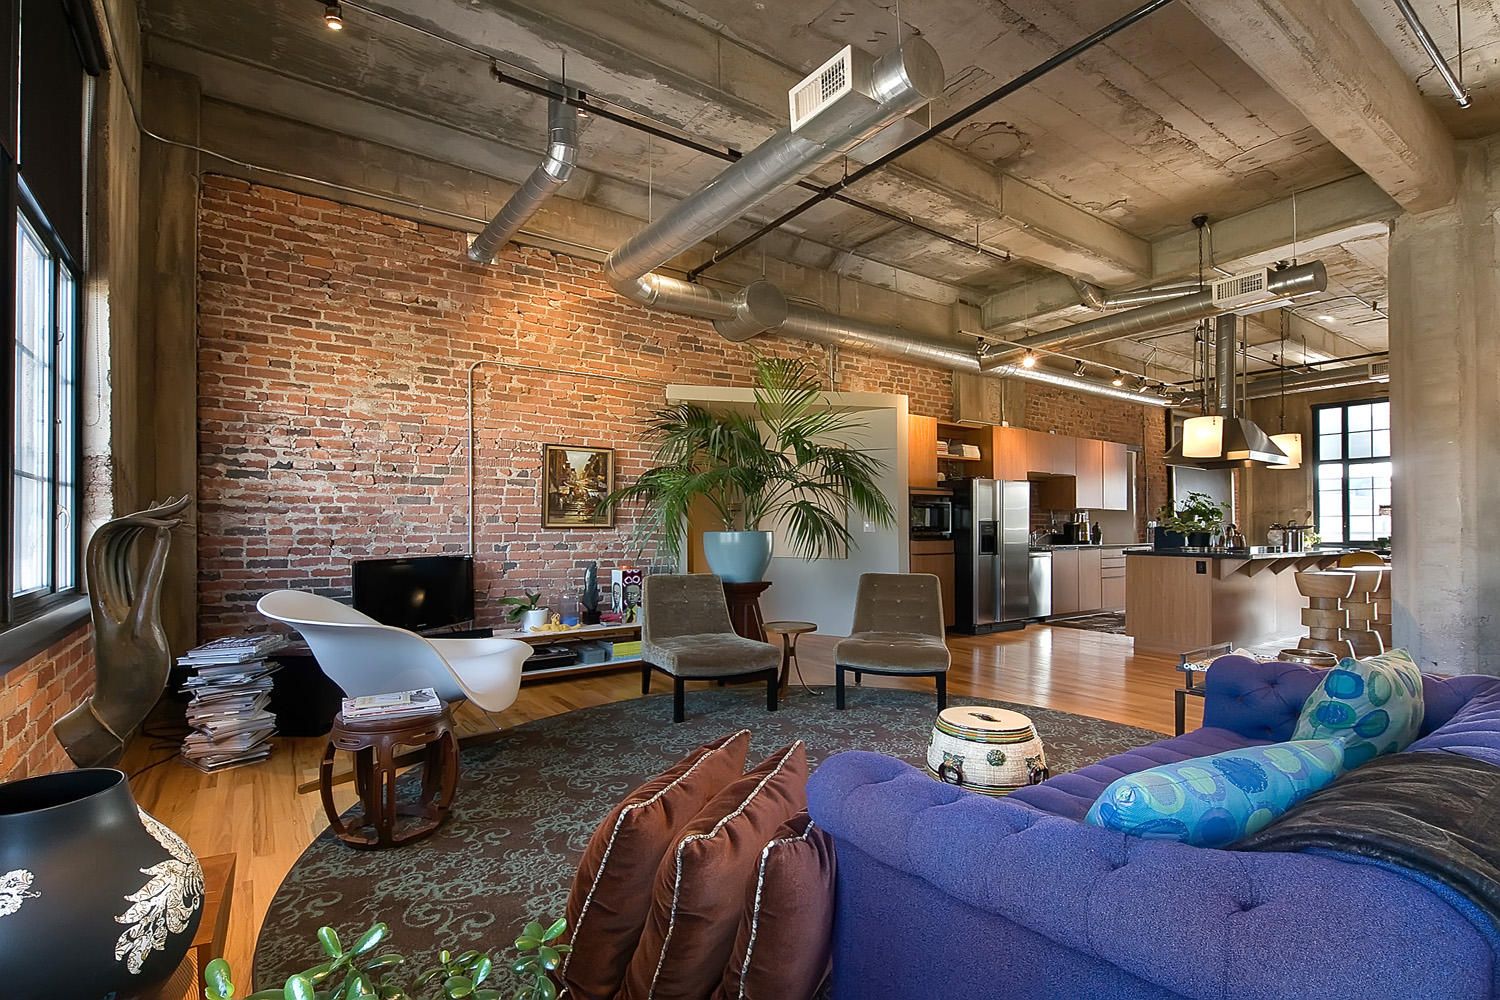 Stunning loft from one of the top ten loft buildings